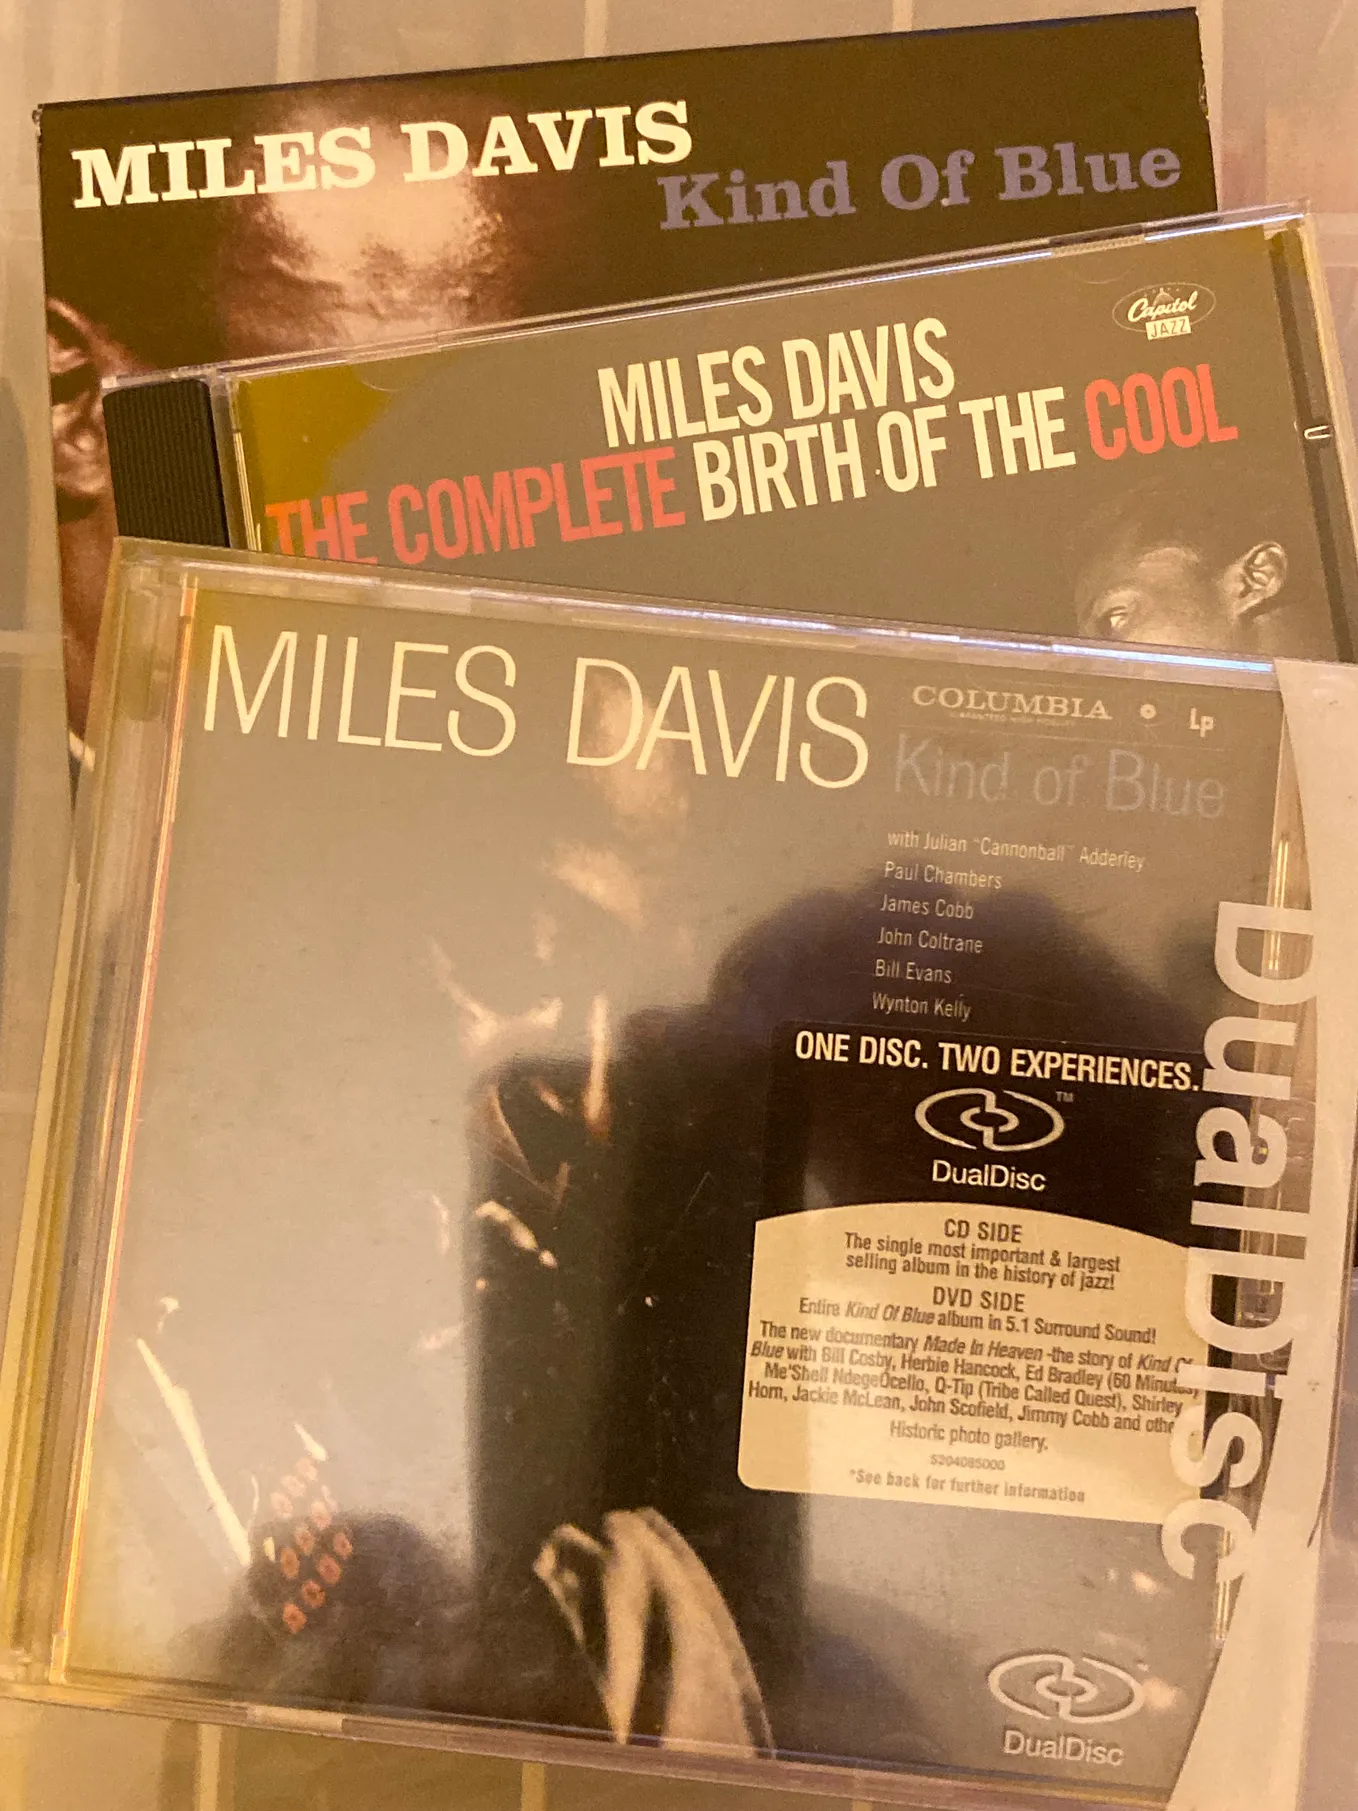 Author’s photo of their copies of the Miles Davis CD albums Kind of Blue on both Not Now and the Dual Disc version from Columbia Legacy, and The Complete Birth of the Cool on Capitol